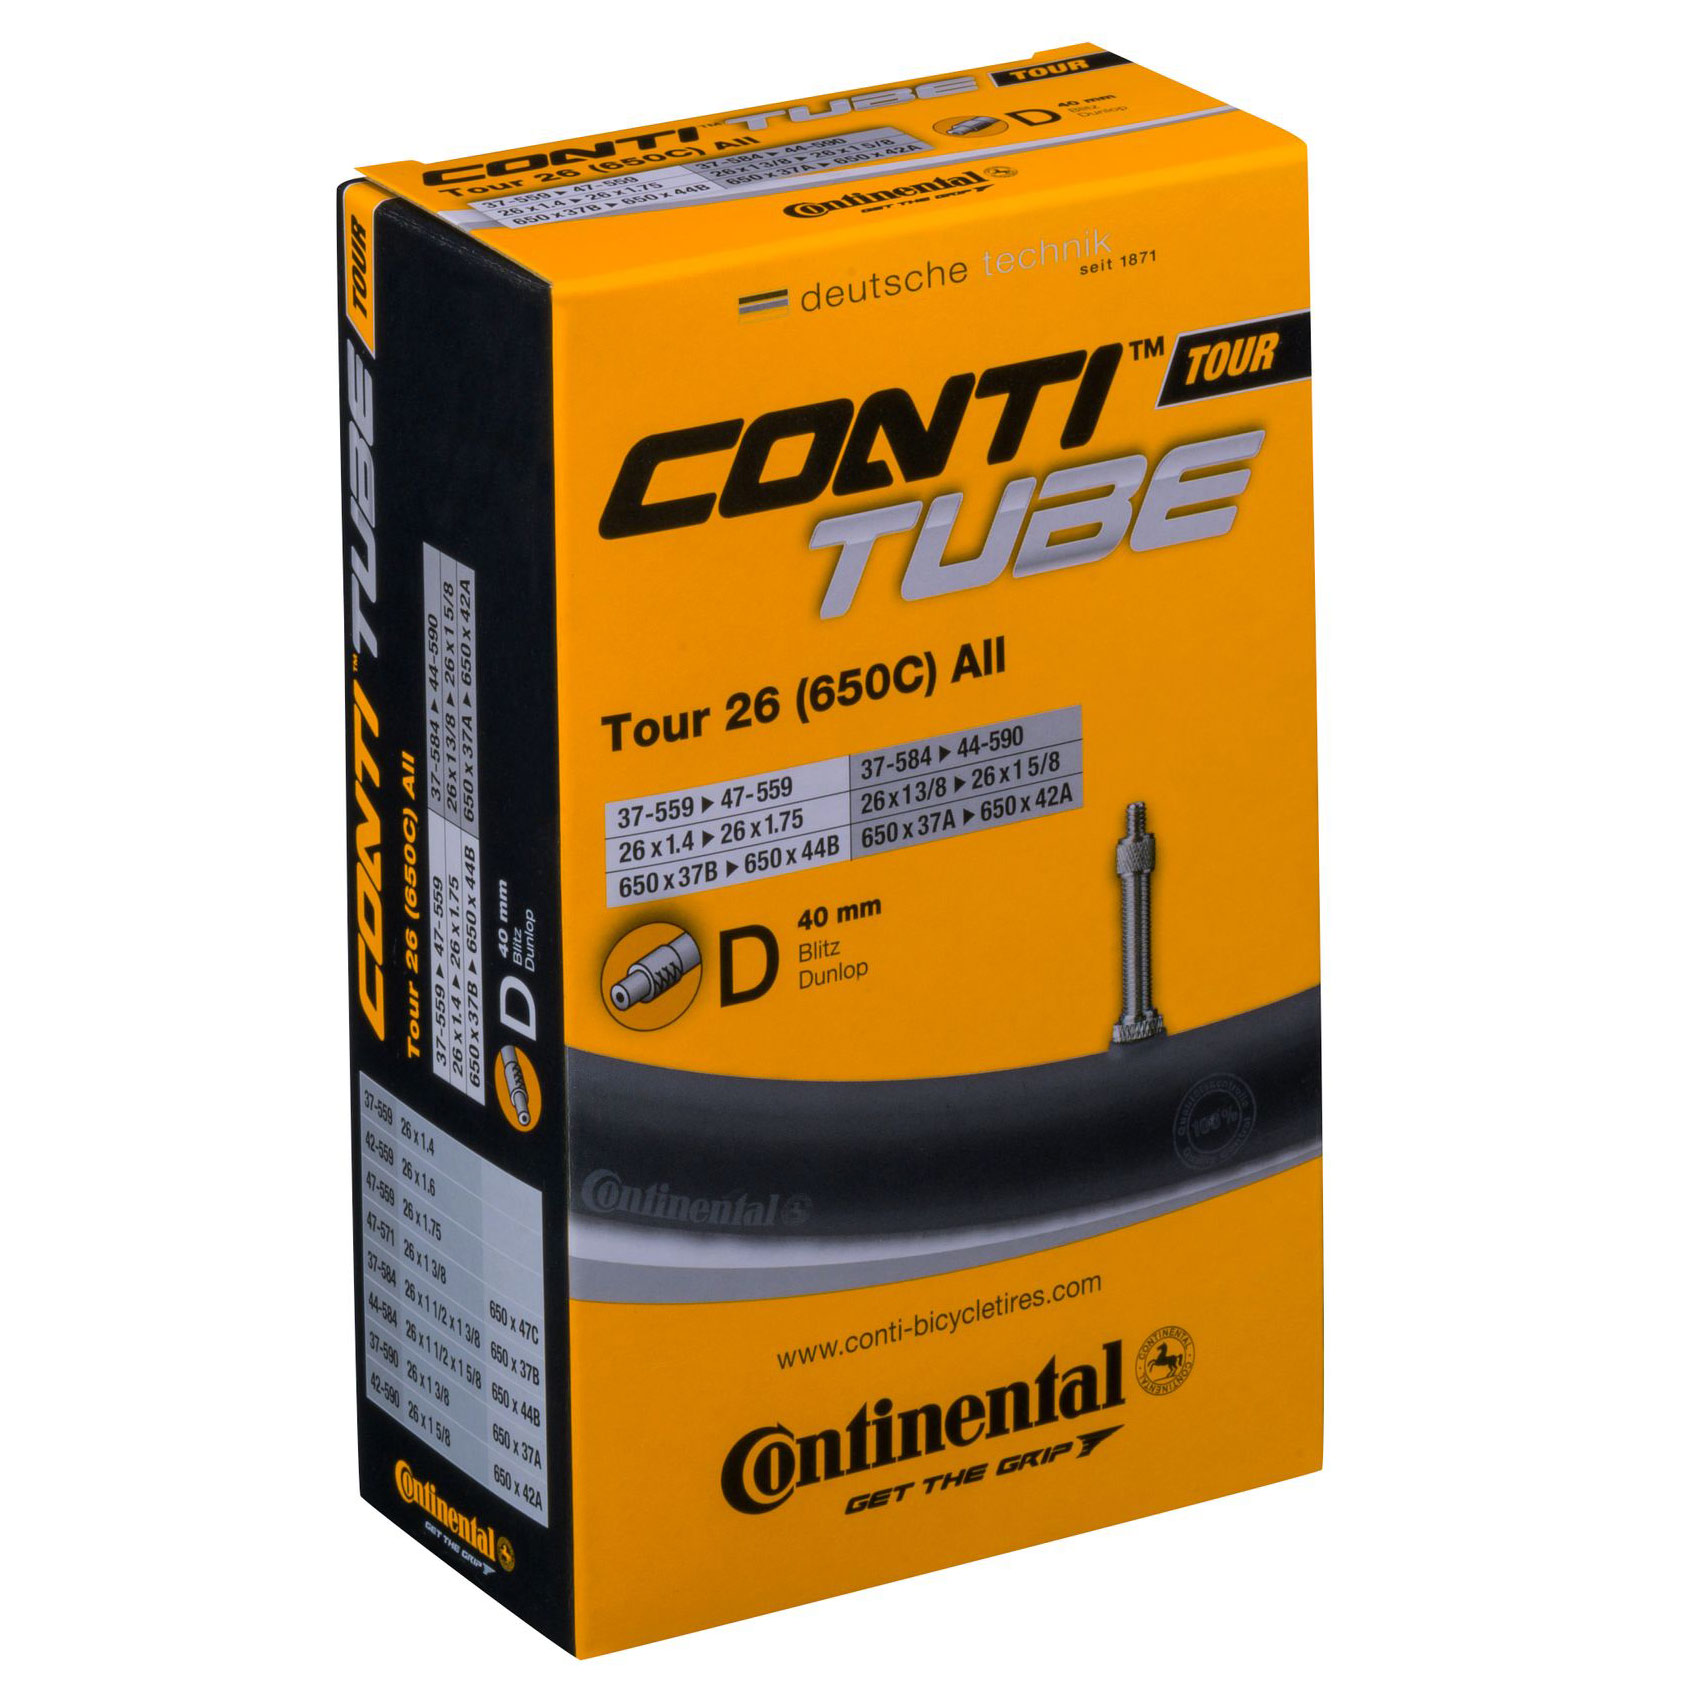 Productfoto van Continental Tour 26 All Tube